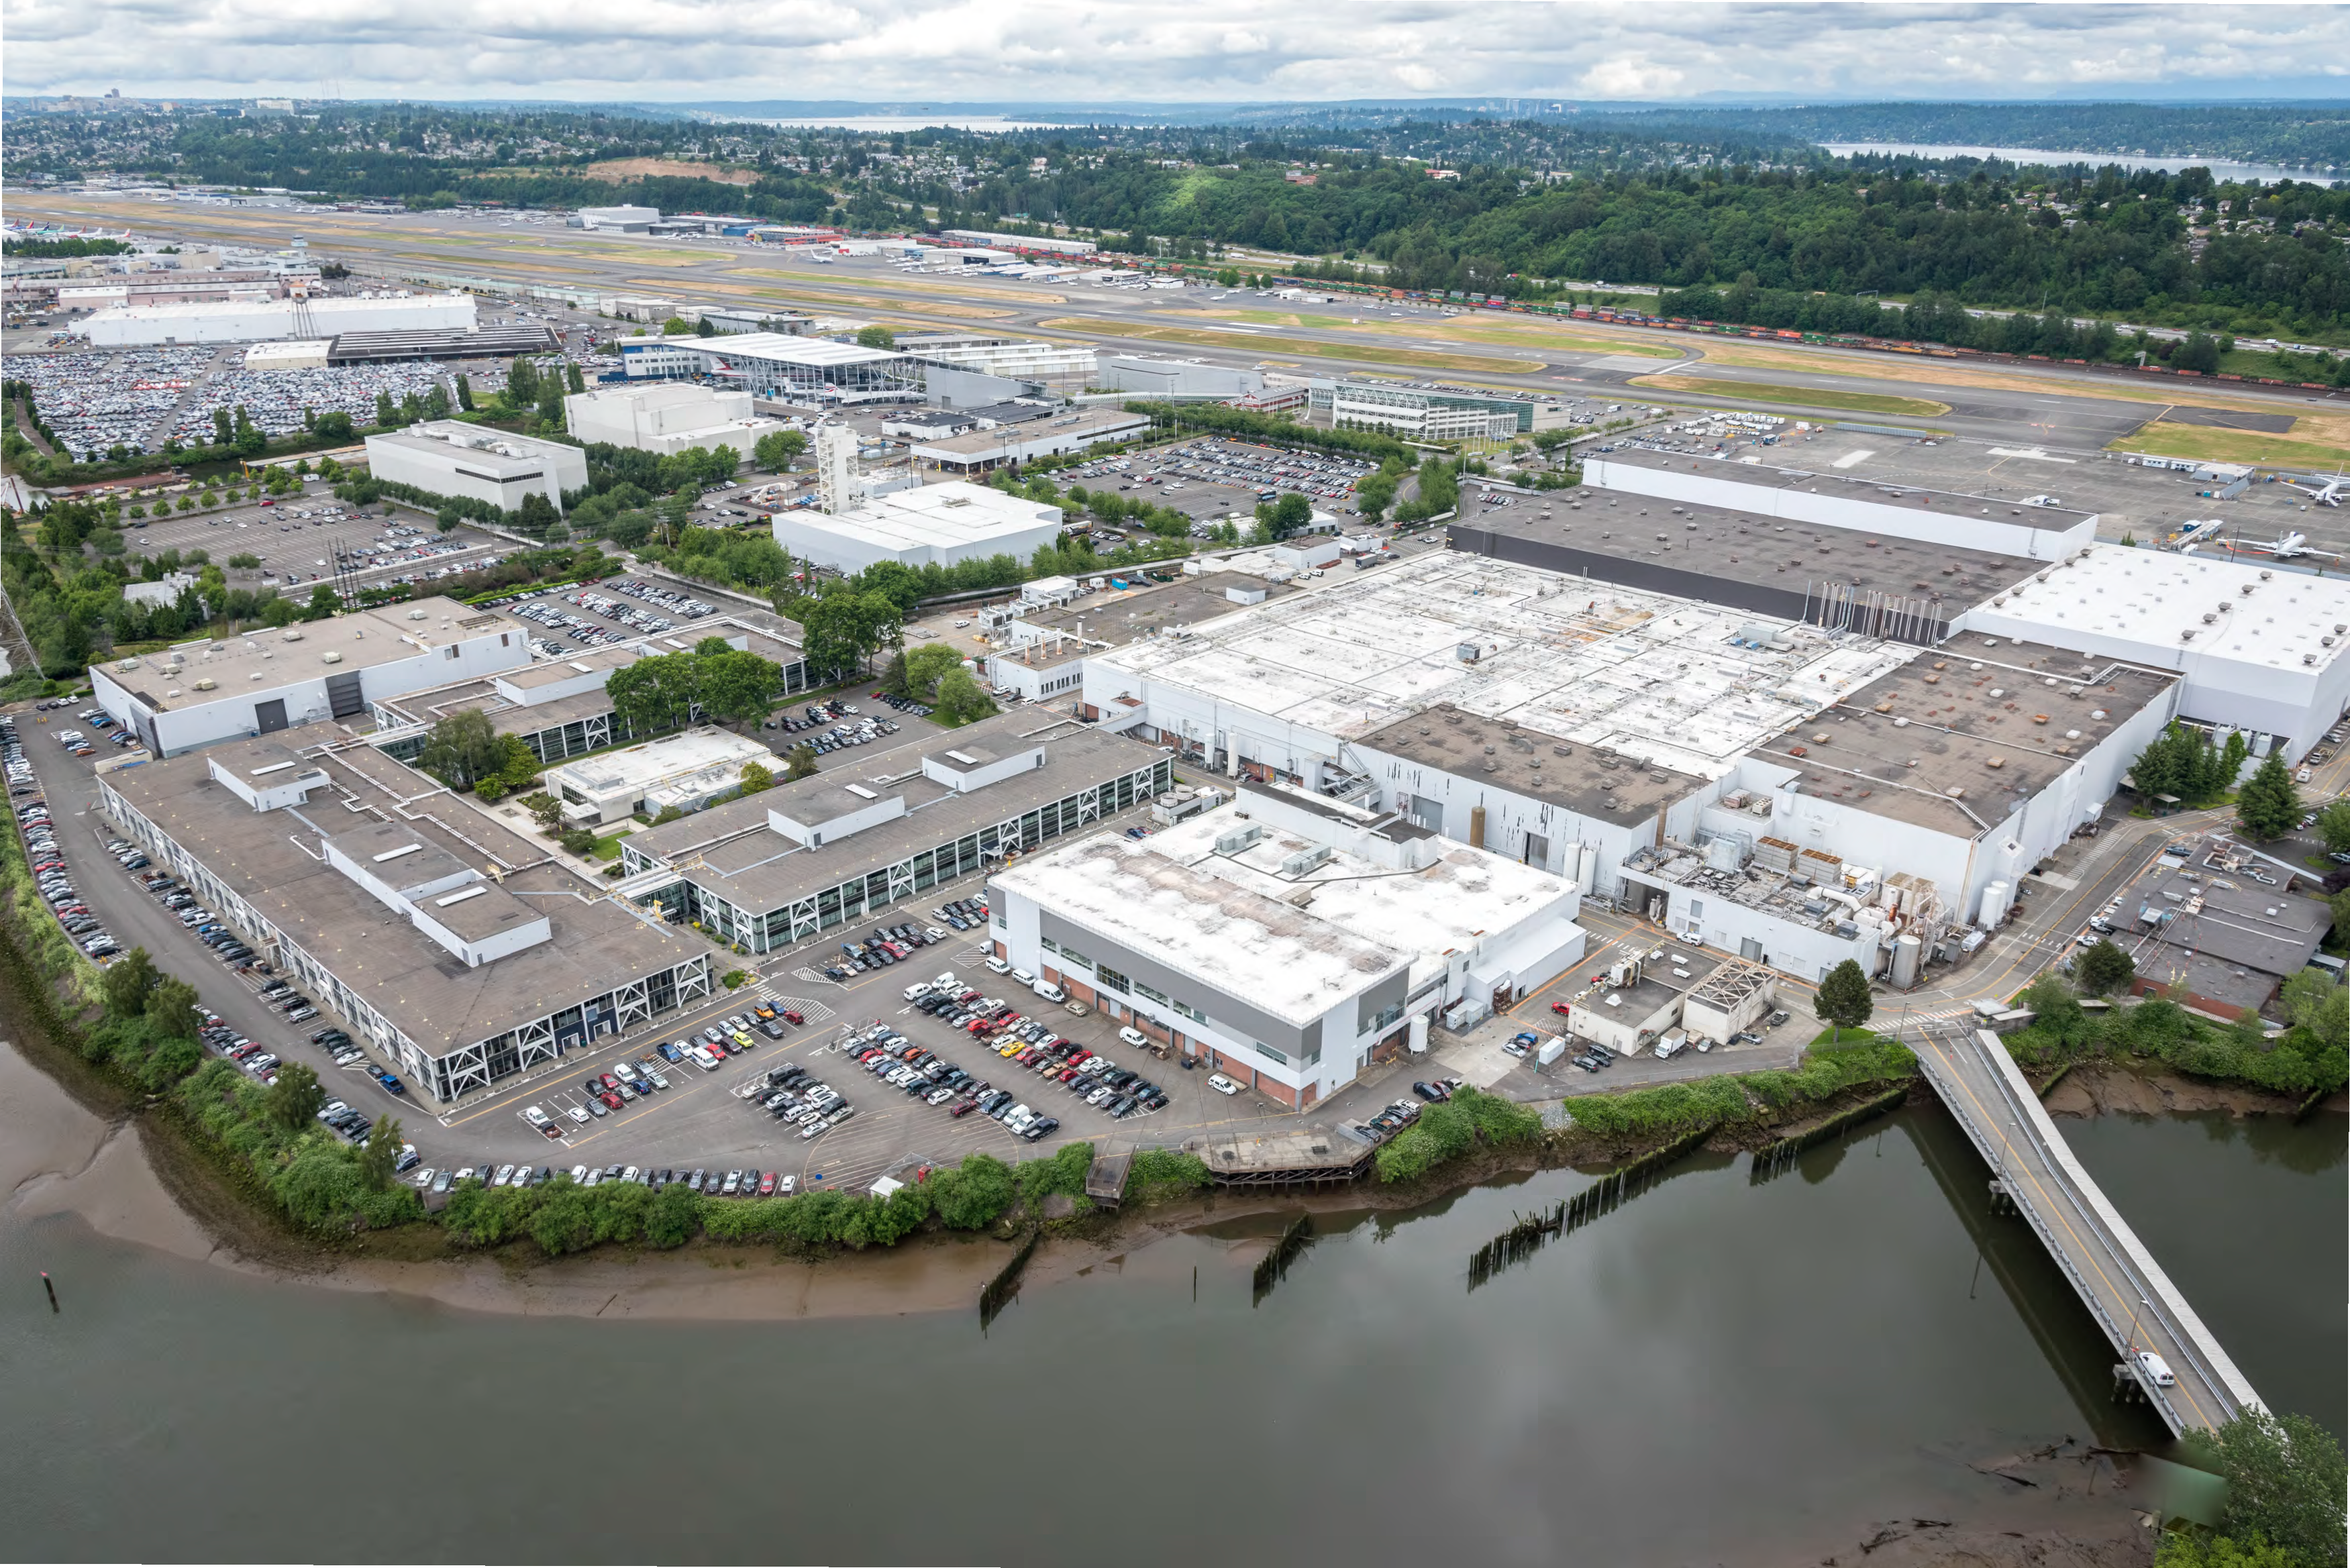 A commercial and industrial site with many buildings and parking areas. A river is seen in the foreground, and the background shows more industial buildings, an airfield and a wooded ridge with homes.